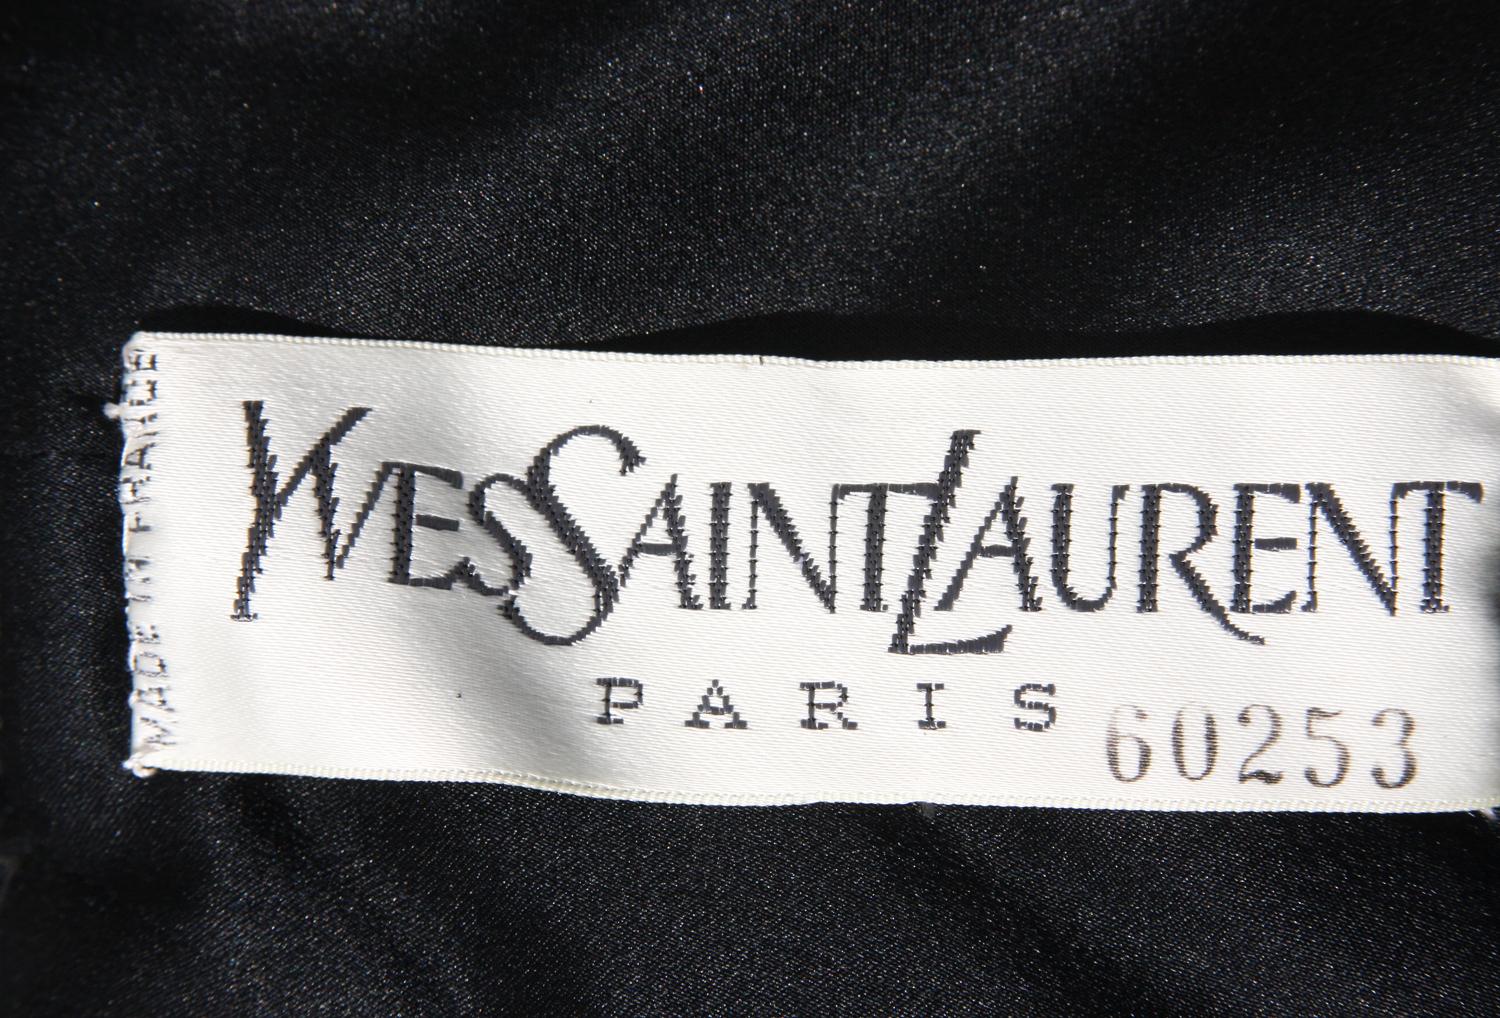 Rare 2 in 1 Yves Saint Laurent Couture Crushed Velvet Numbered Dress c. 1986 For Sale 8